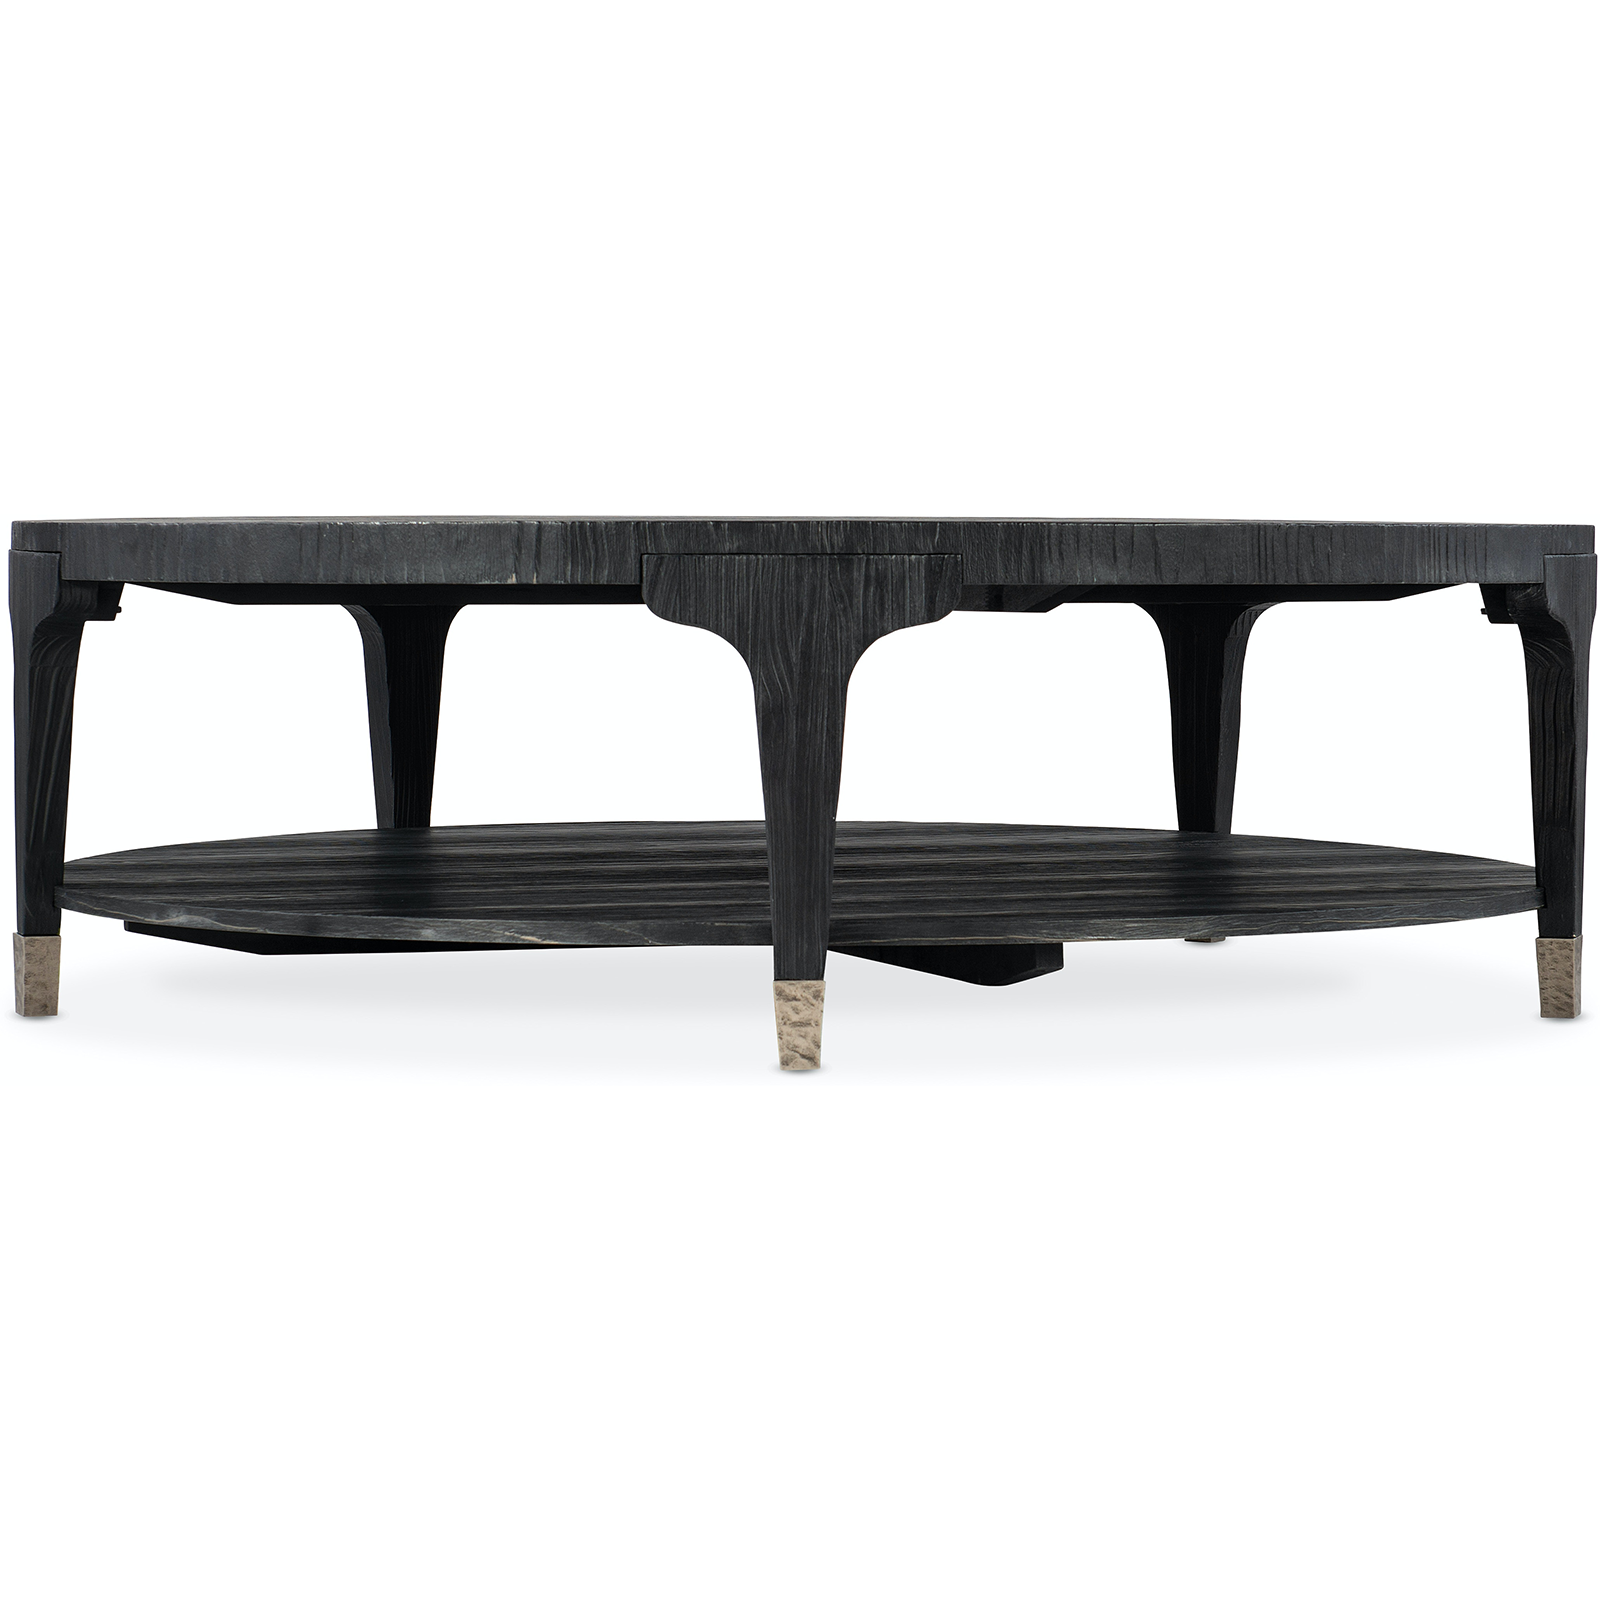 Colin 60" Round Coffee Table